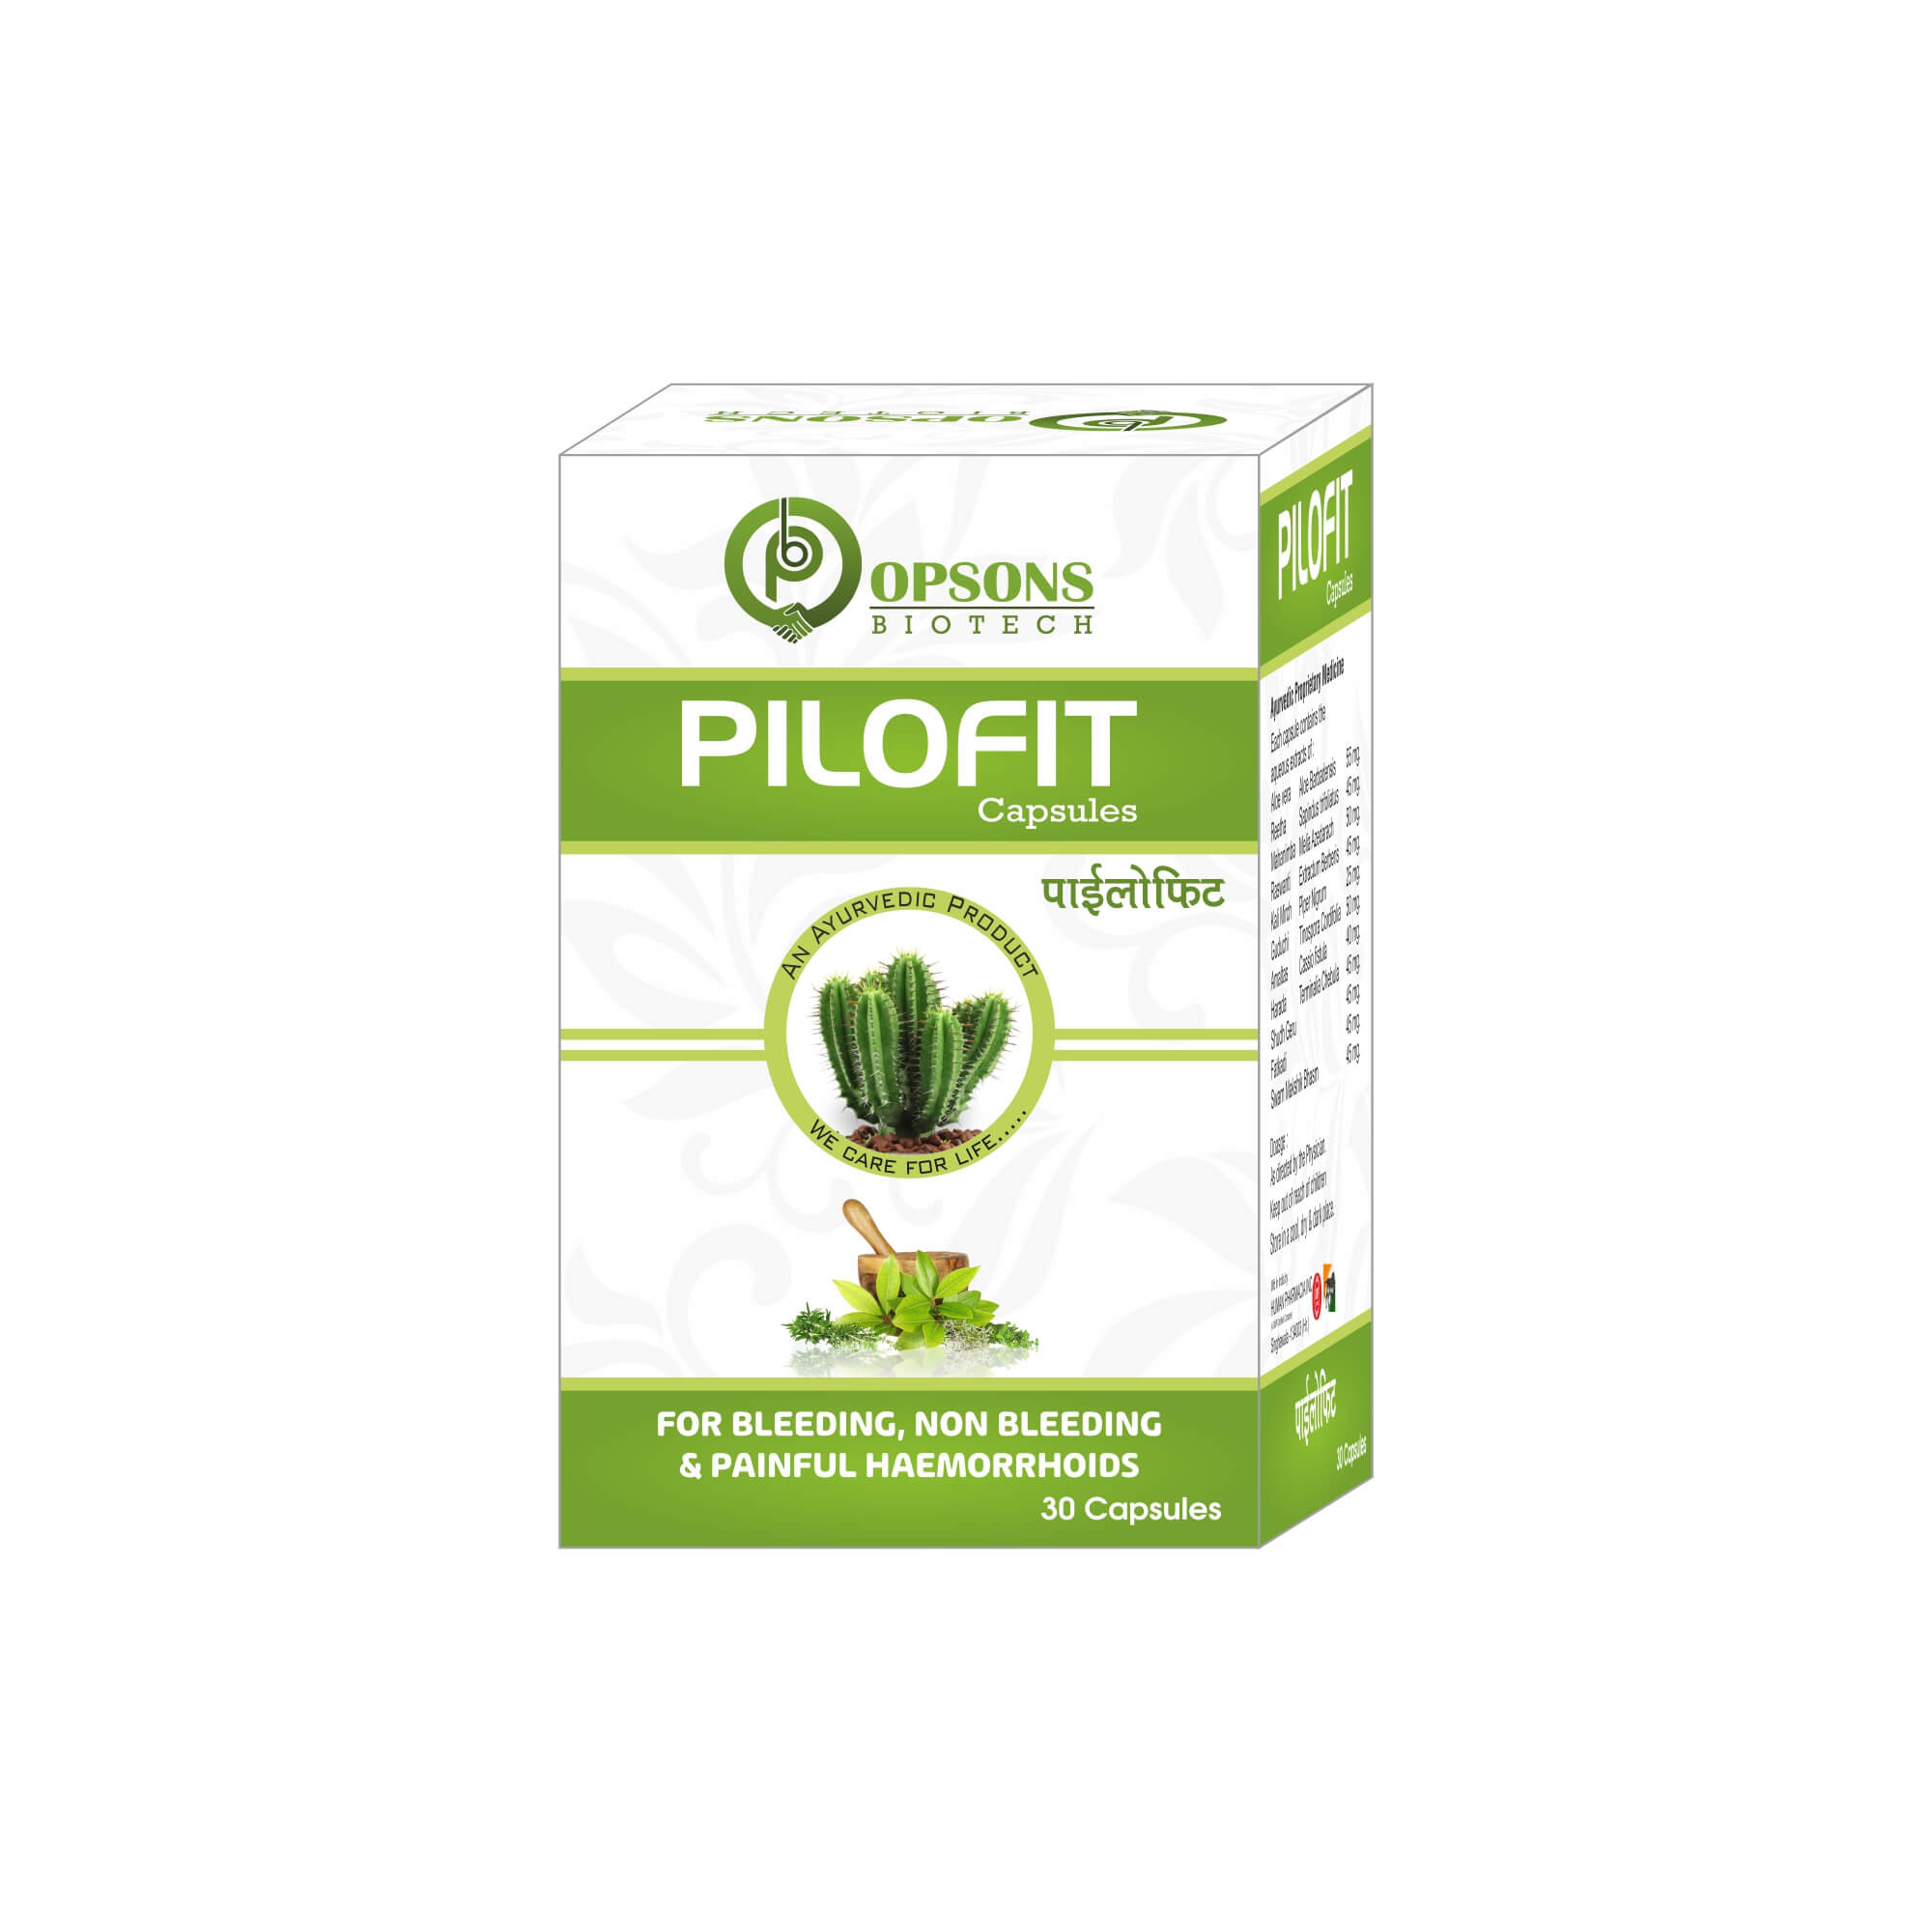 Product Name: Pilofit, Compositions of are For Bleeding, Non Bleeding & Painful,Haemorrphonis - Opsons Biotech